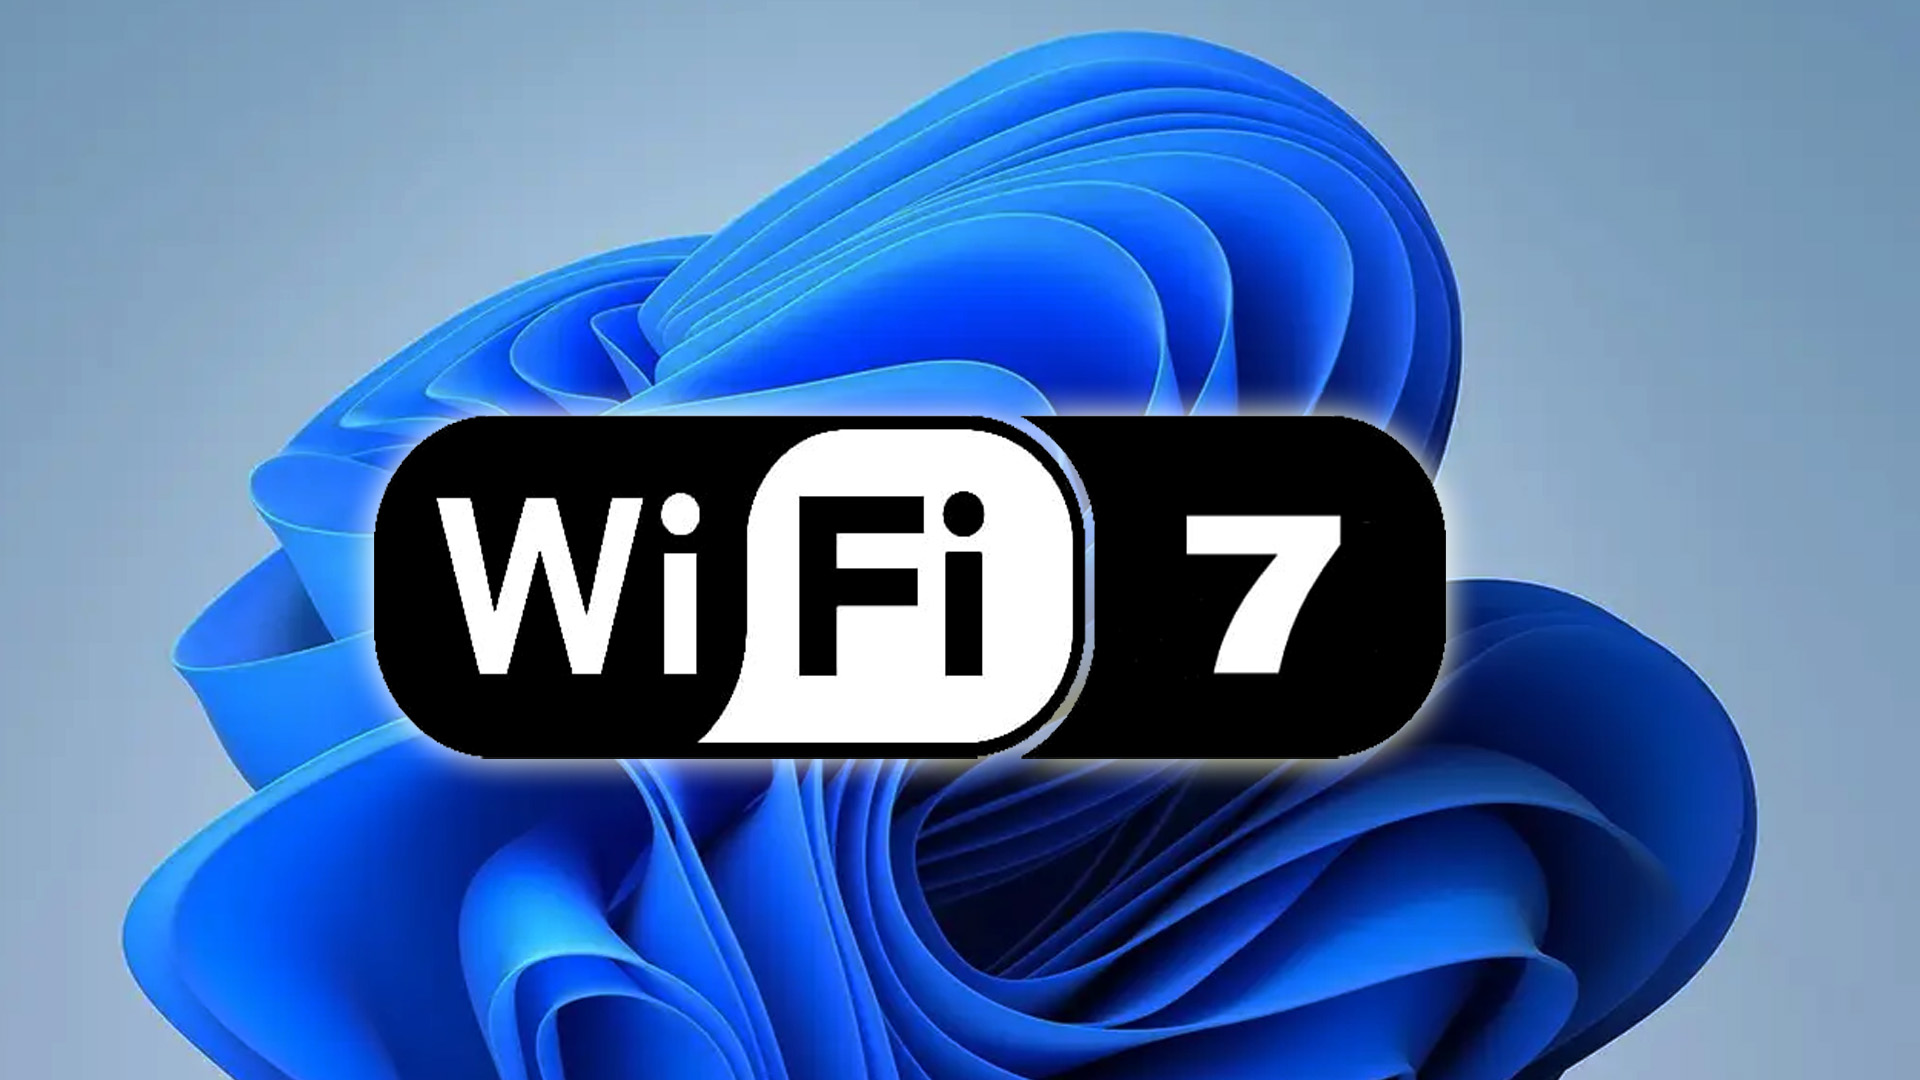 Intel says WiFi 7 won't work without Windows 11 for Microsoft users